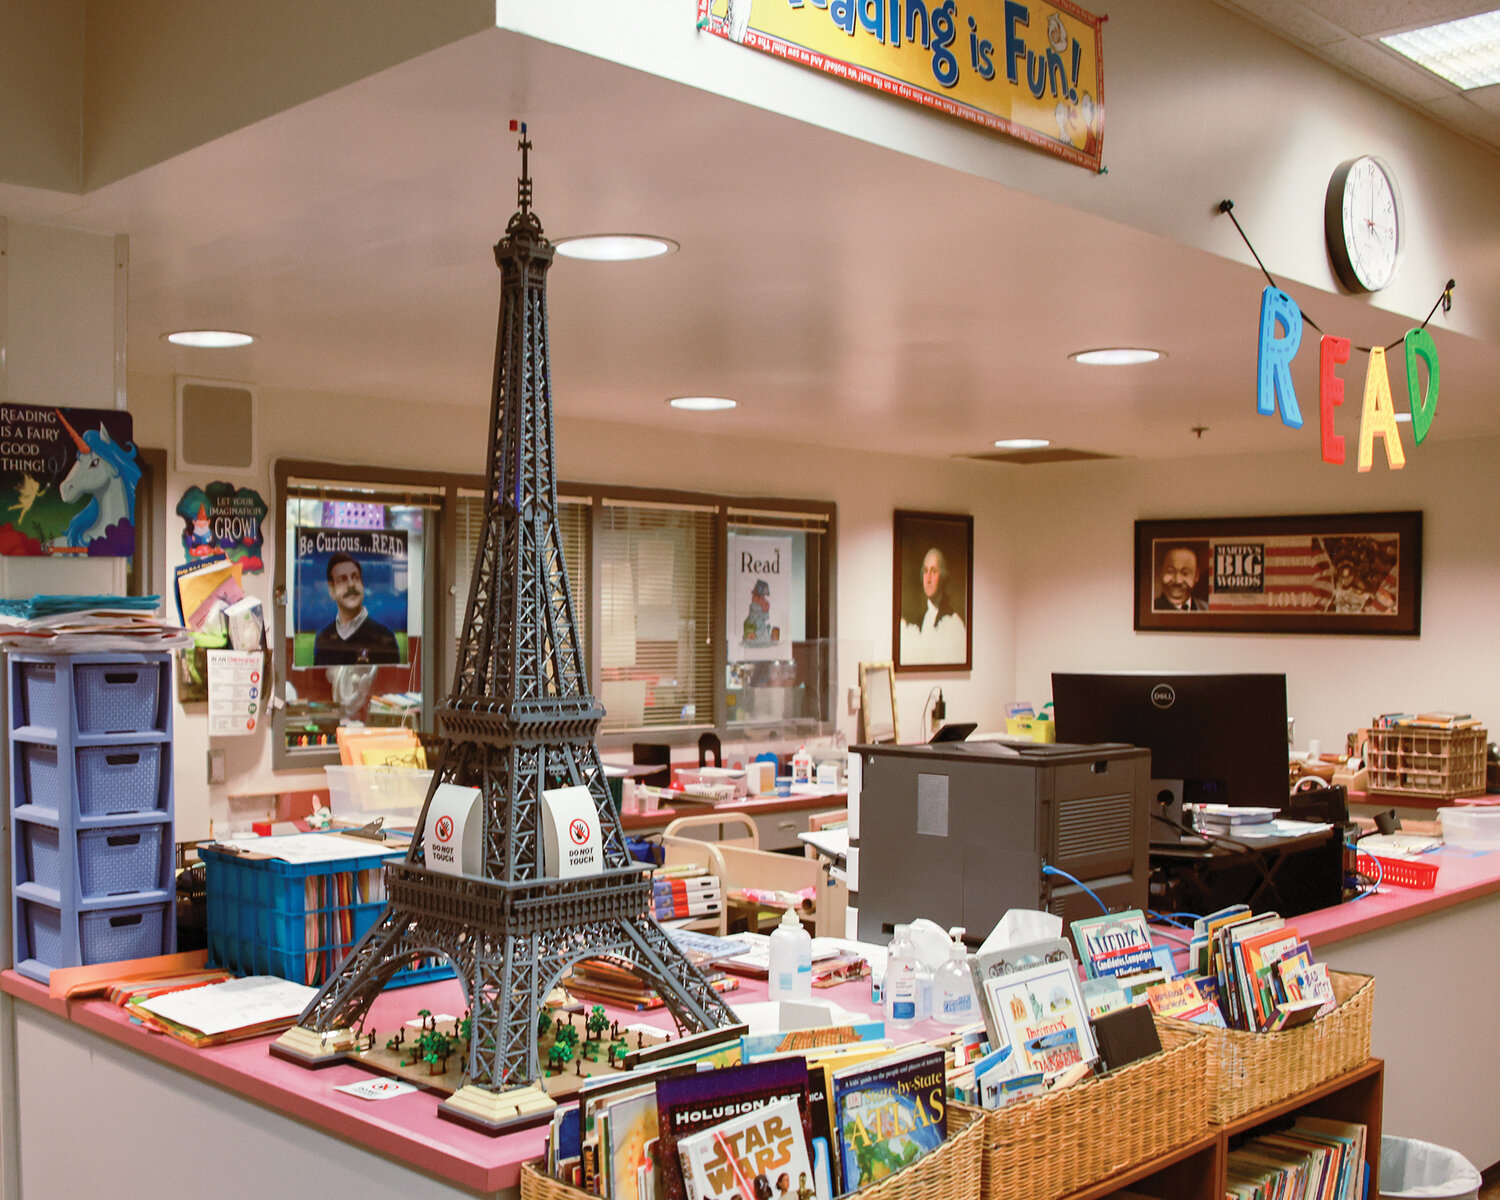 A large Eiffel Tower Lego set built by Ted Schelvan is on display in the Captain Strong Primary School’s library, seen on Wednesday, May 3.